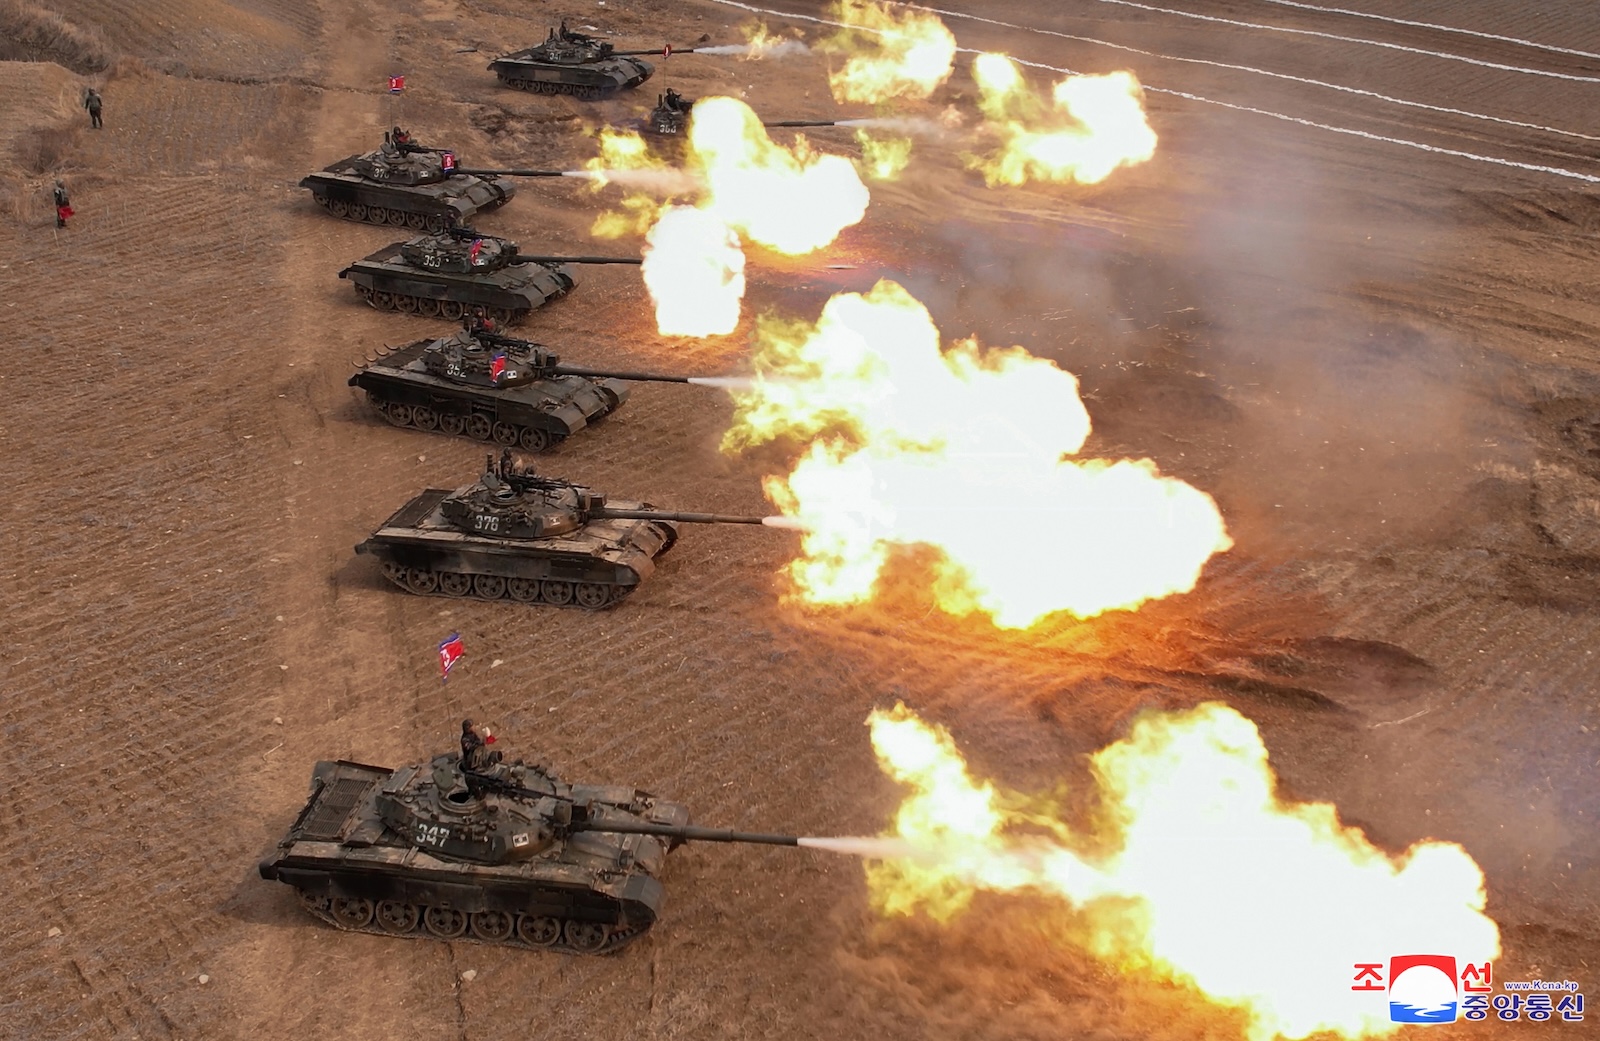 epa11219538 A photo released by the official North Korean Central News Agency (KCNA) shows tanks firing during a training competition involving tank units of the Korean People's Army (KPA), at an undisclosed location in North Korea, 13 March 2024 (issued 14 March 2024). North Korean Supreme leader Kim Jong Un joined troops in military training to operate new developed battle tanks, KCNA reported on 14 March.  EPA/KCNA   EDITORIAL USE ONLY  EDITORIAL USE ONLY